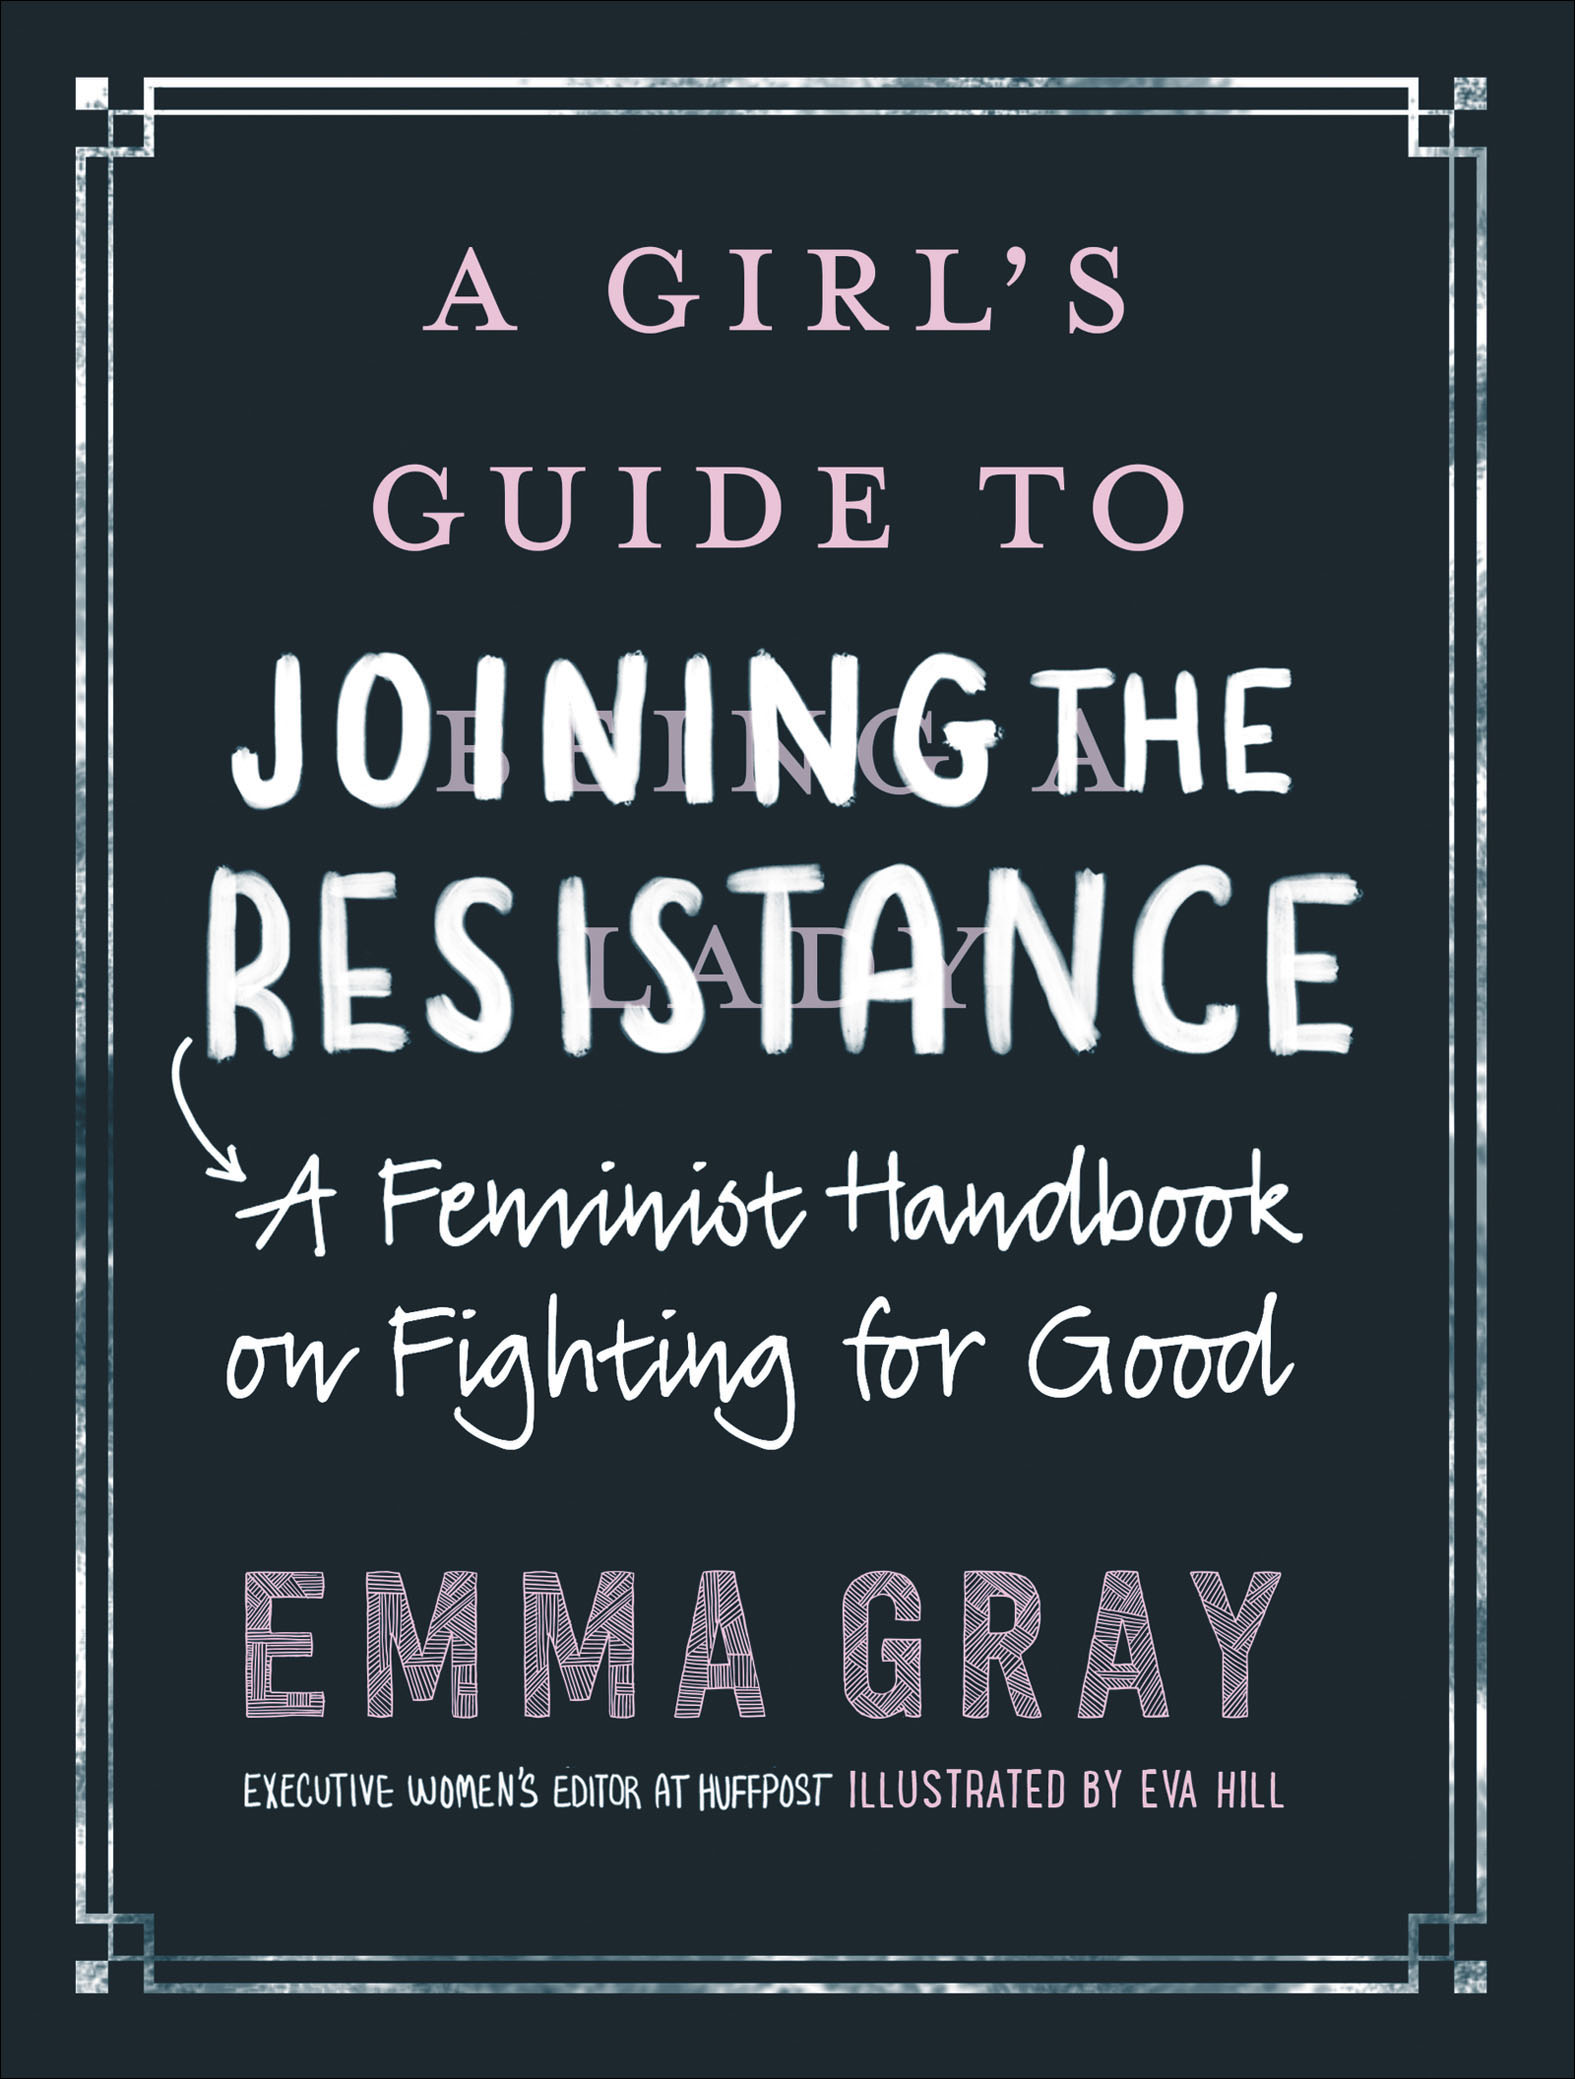 A girl's guide to joining the resistance a feminist handbook on fighting for good cover image